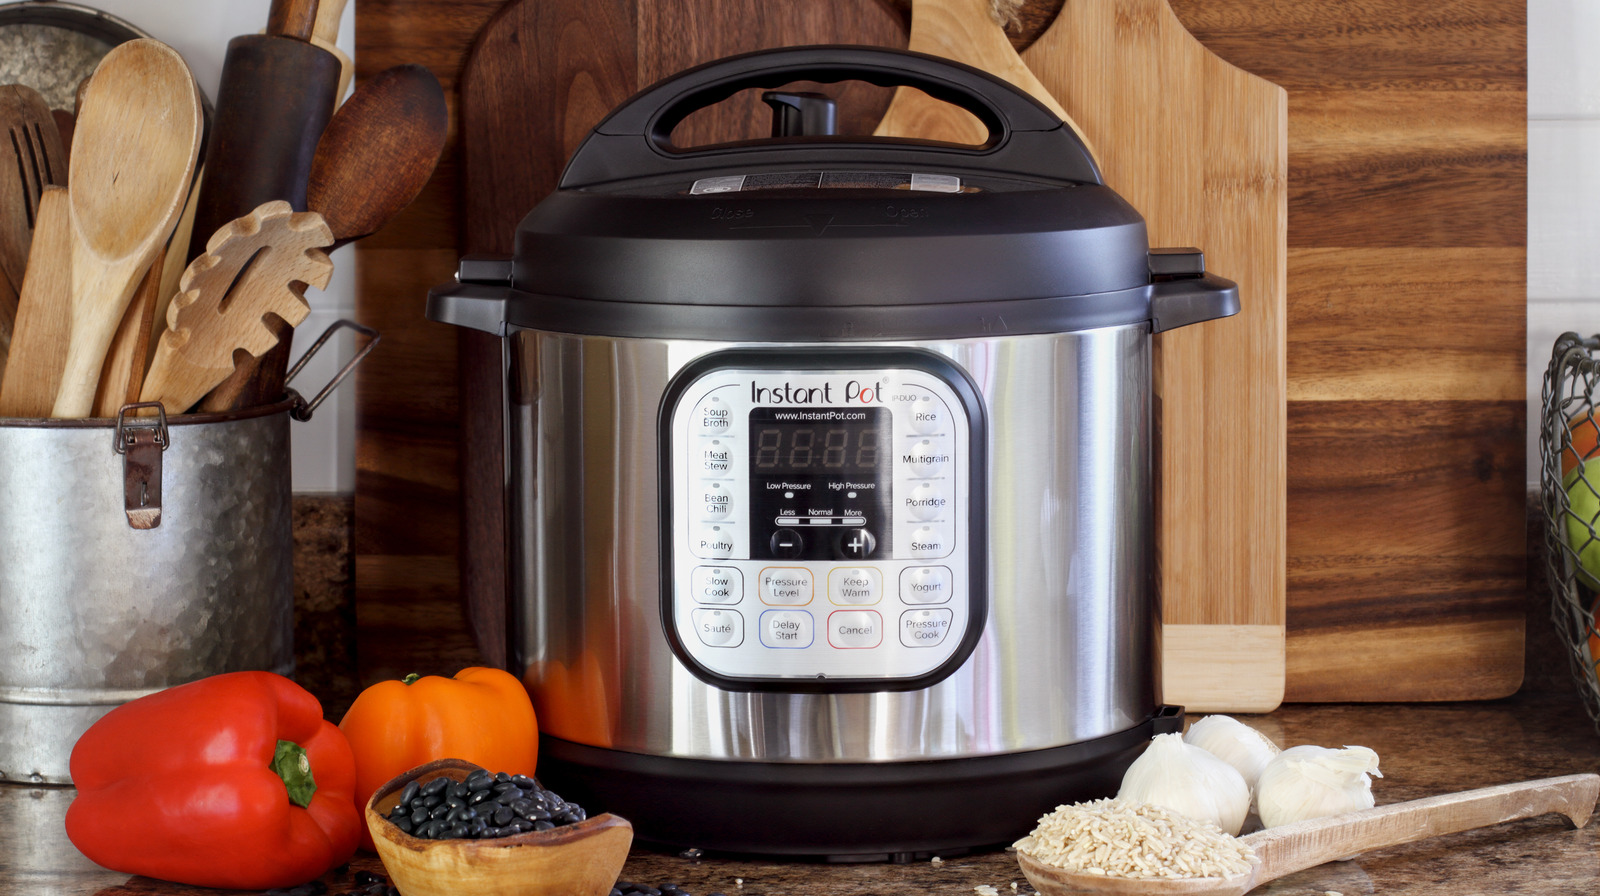 https://www.tastingtable.com/img/gallery/the-maker-of-instant-pot-pyrex-has-filed-for-chapter-11-bankruptcy/l-intro-1686686687.jpg